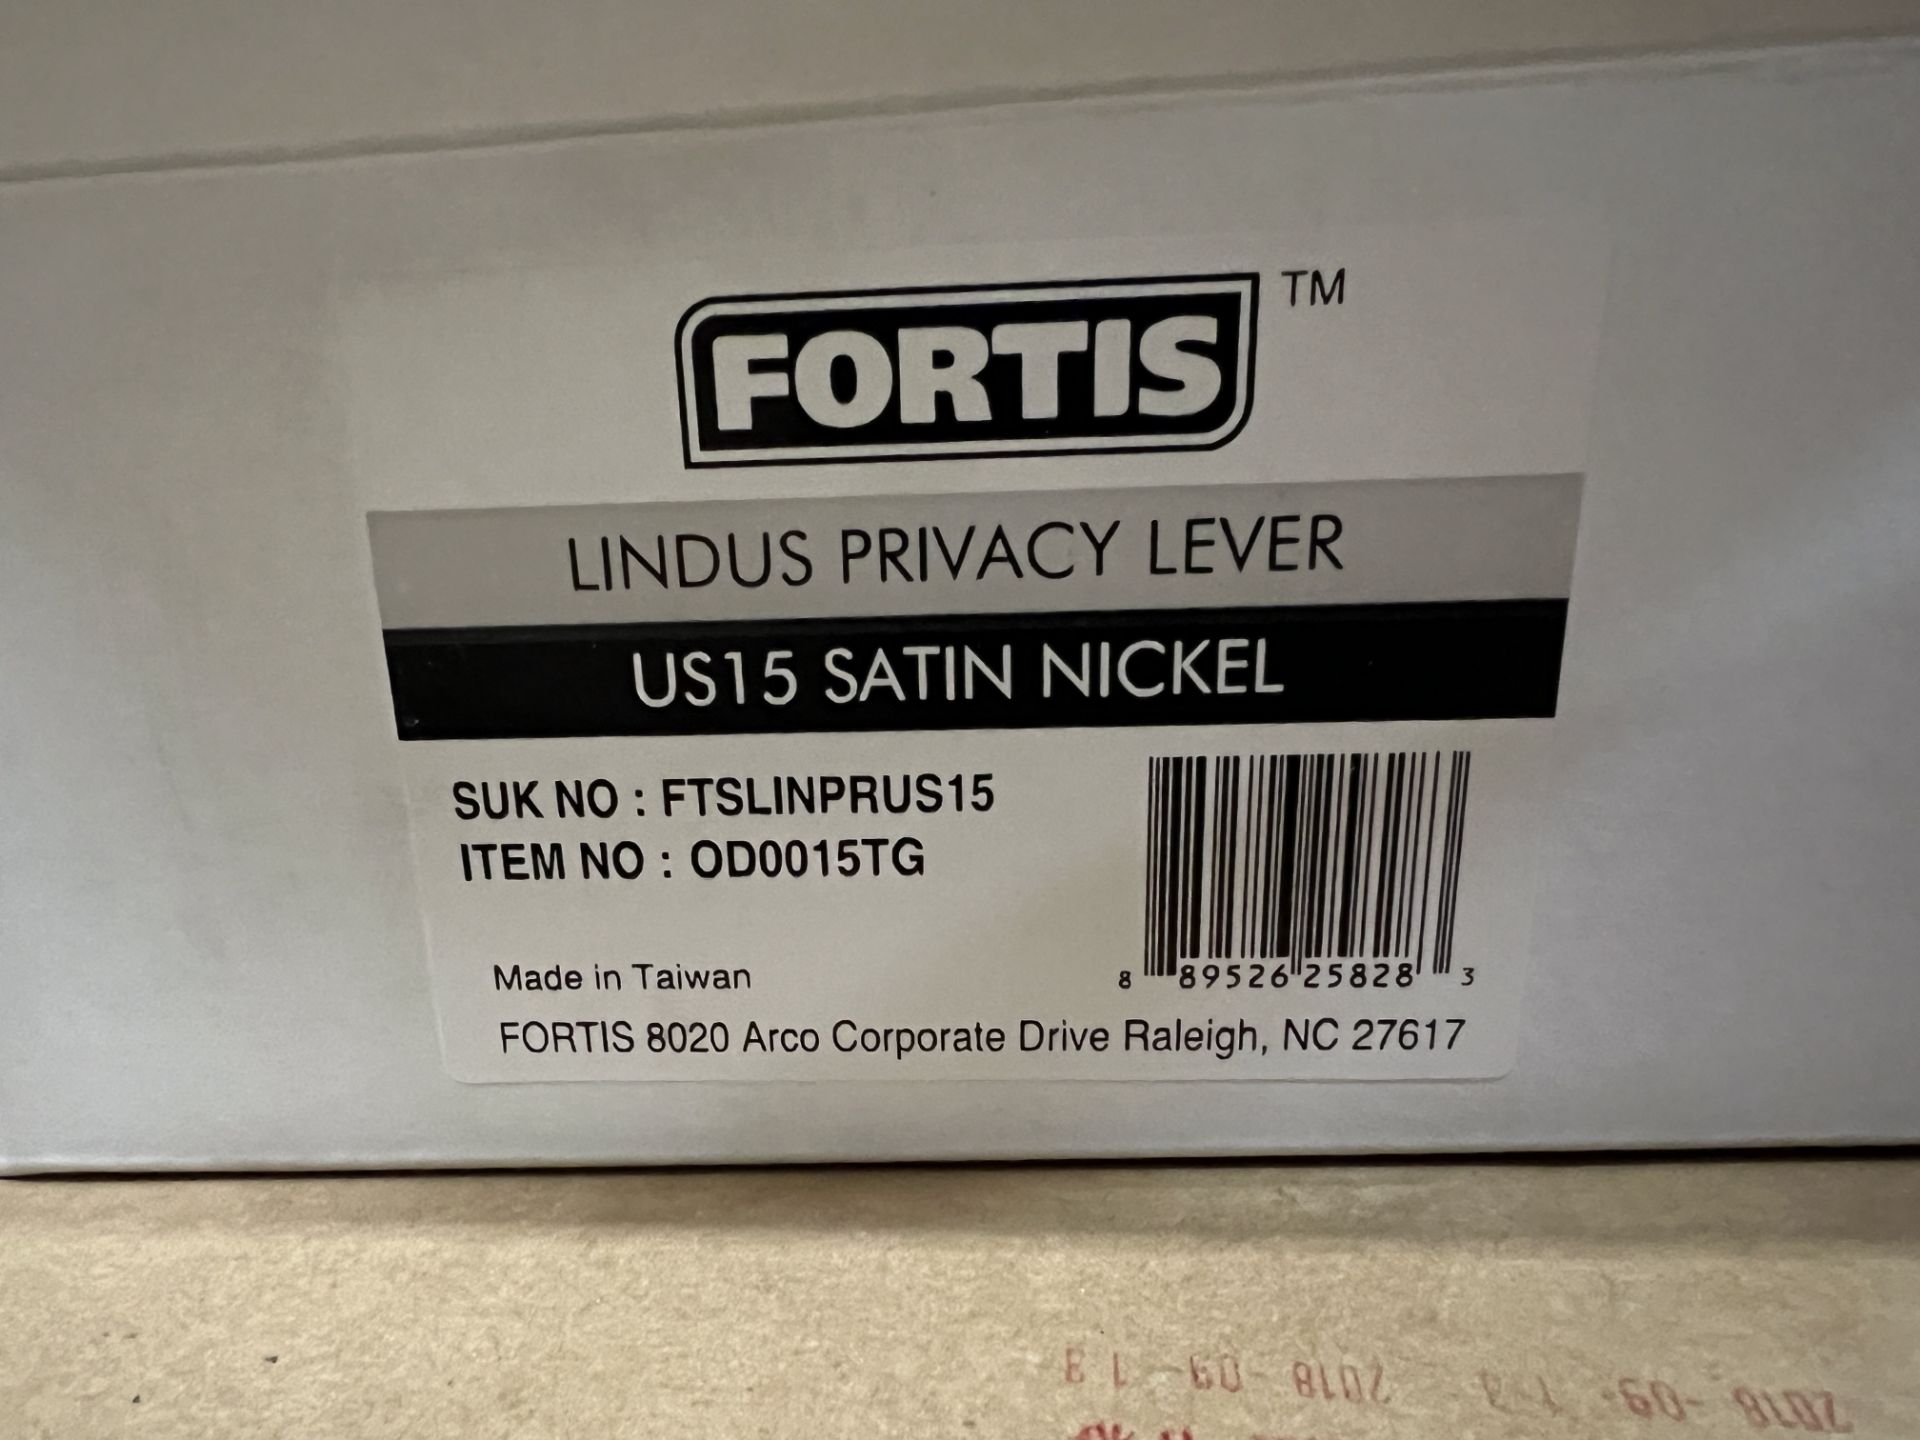 (10) FORTIS LINDUS PRIVACY LEVERS US15 SATIN NICKEL